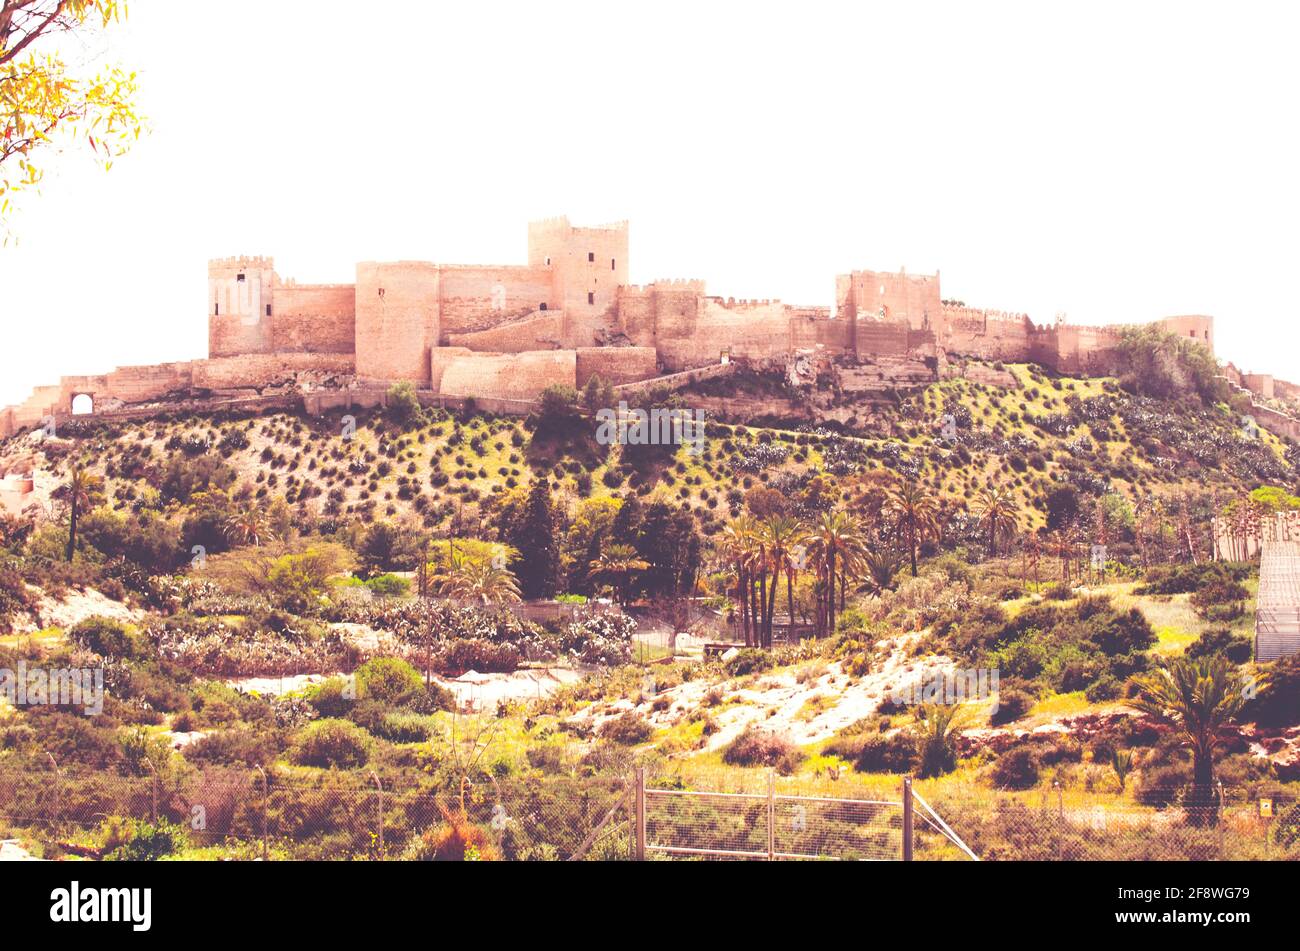 The citadel, castle and walls of Cerro de San Cristóbal in the Spanish city of Almería is one of the most important Andalusian monumental and archaeol Stock Photo